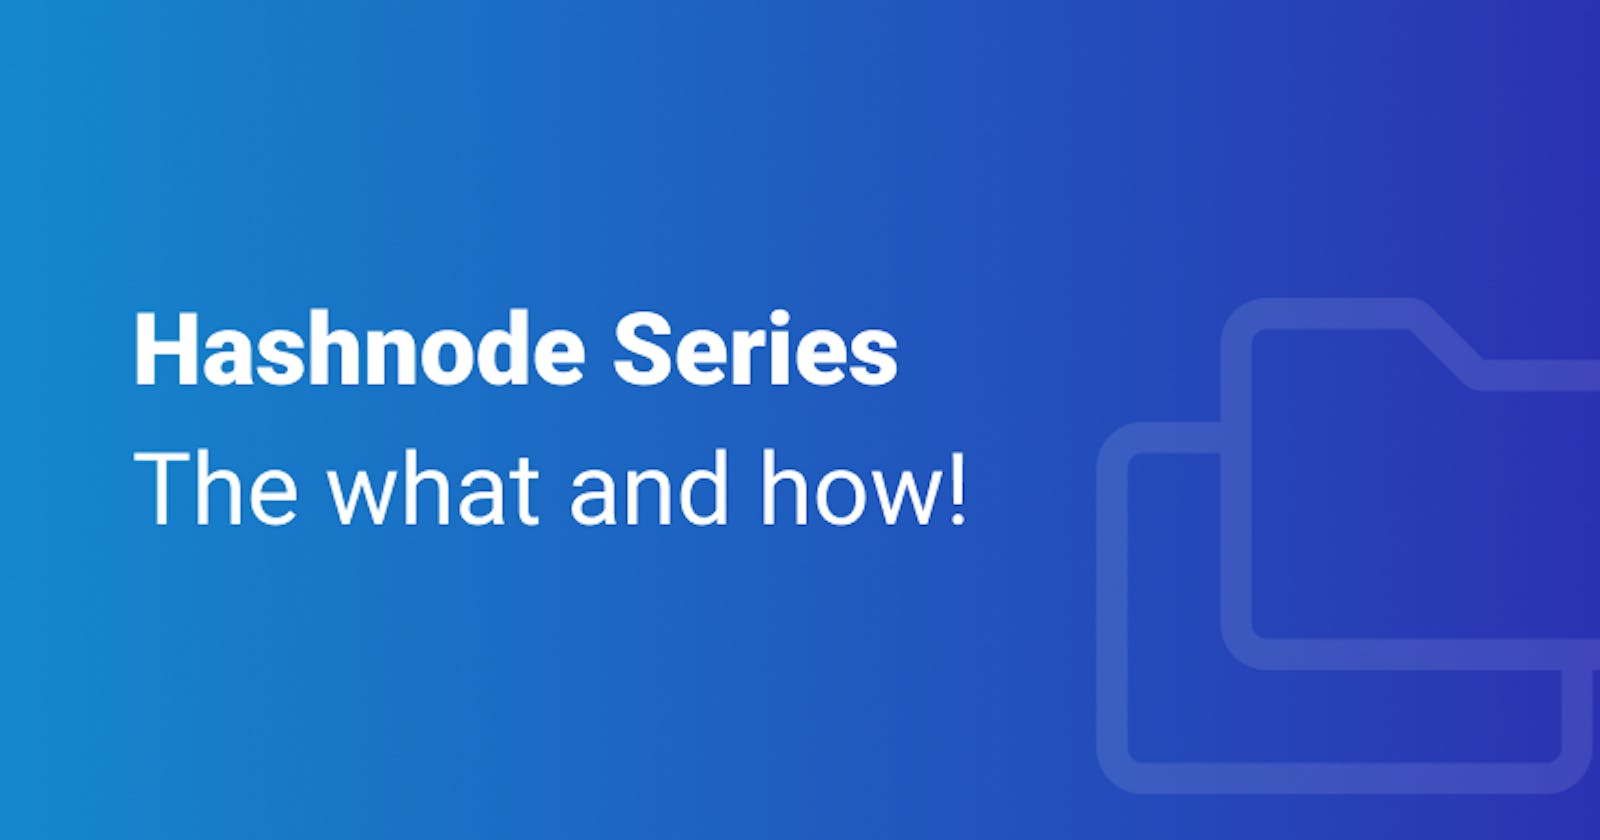 Hashnode Series: The what and how!